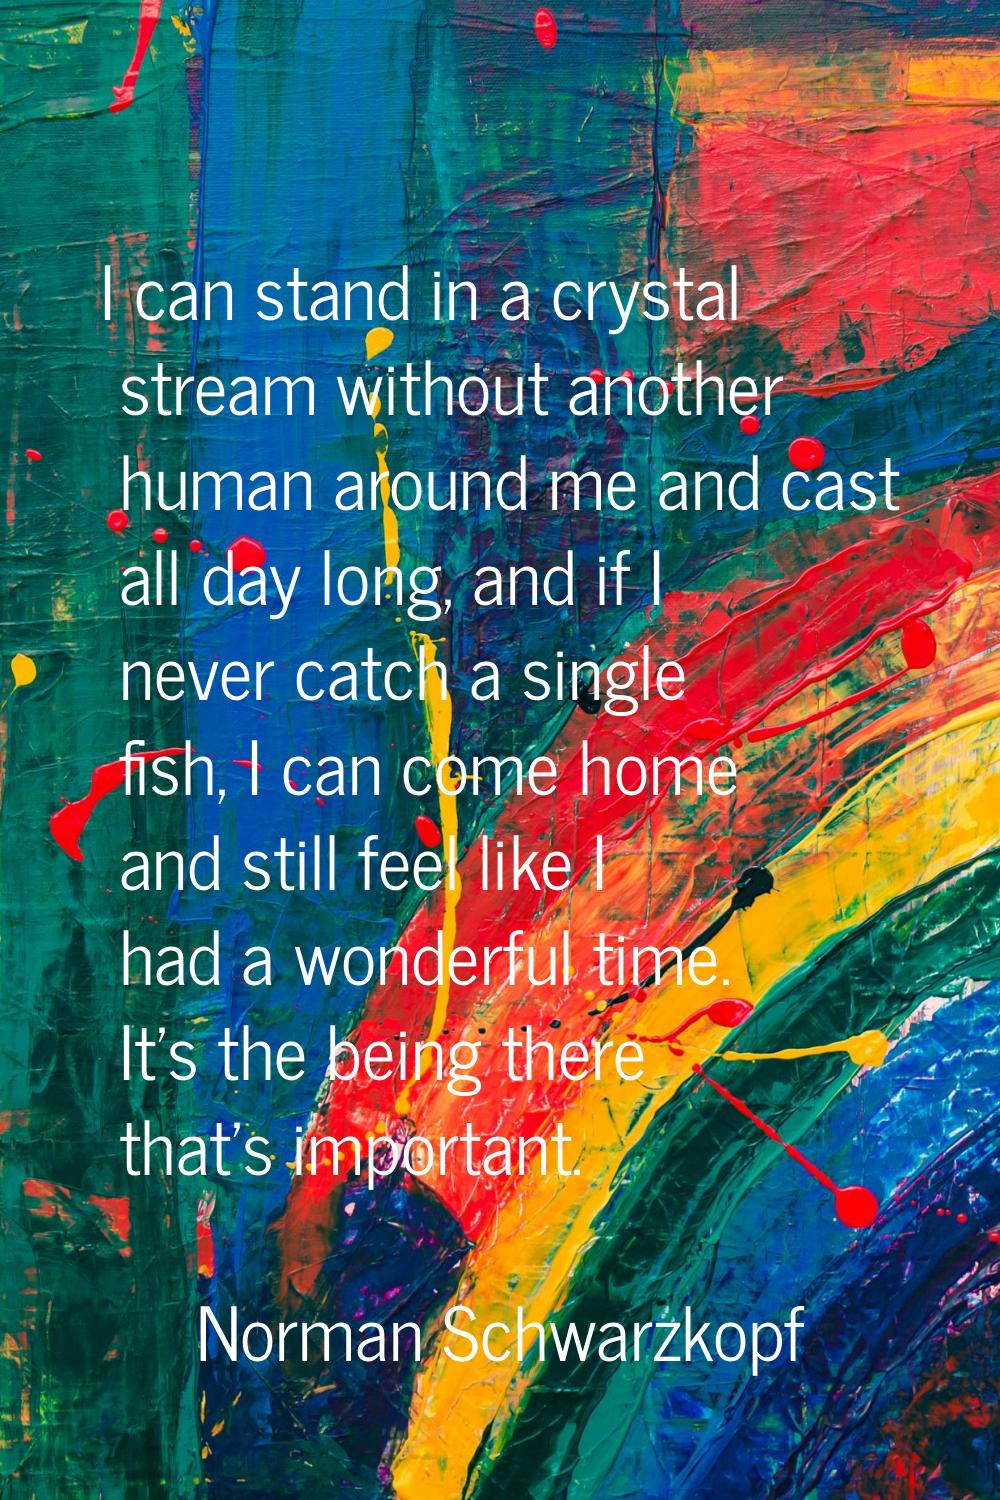 I can stand in a crystal stream without another human around me and cast all day long, and if I nev